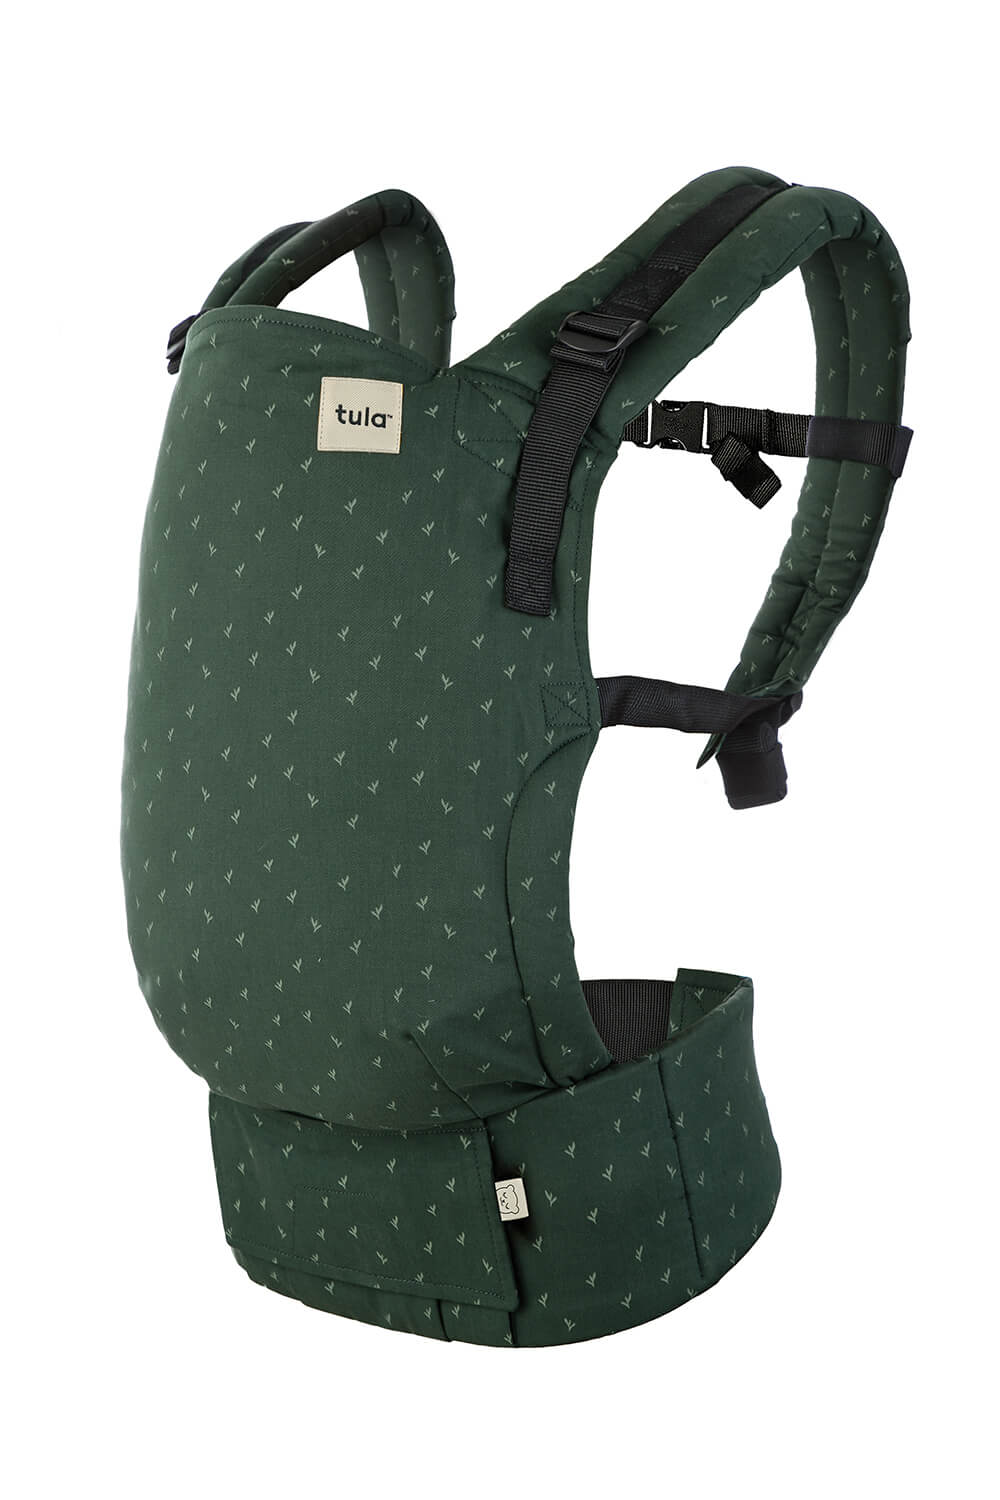 Free baby carrier samples